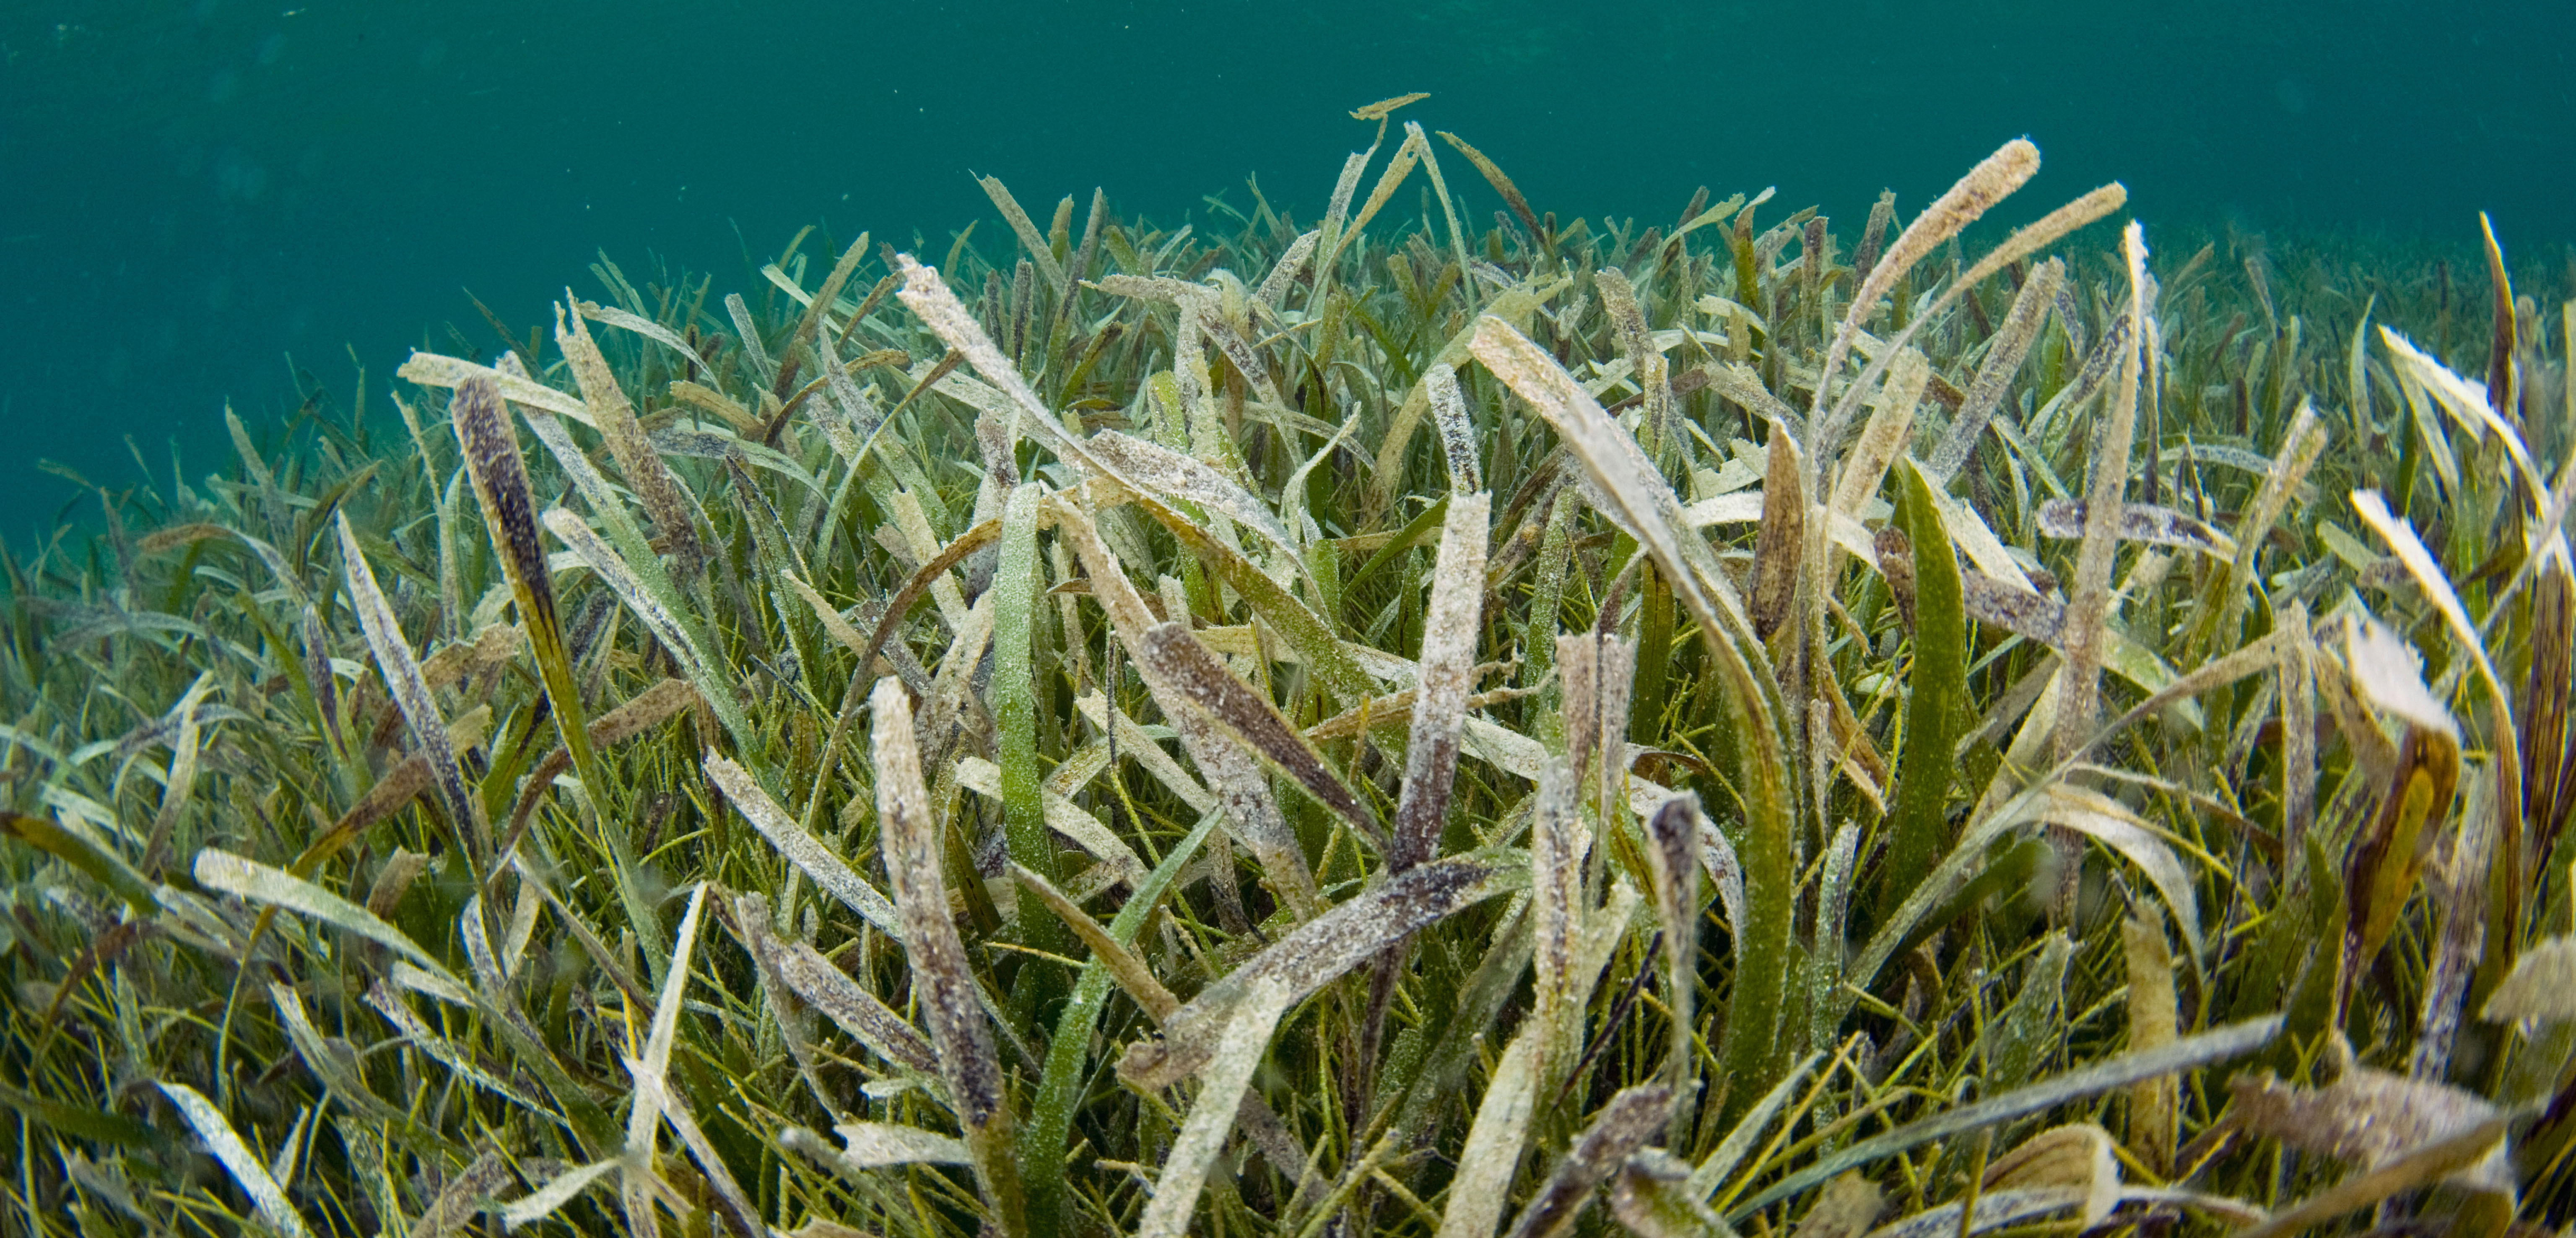 The seagrass Thalassia testudinum is the first marine plant known to have its reproduction facilitated by living creatures, rather than the waves. Photo by Michael Patrick O’Neill/Alamy Stock Photo